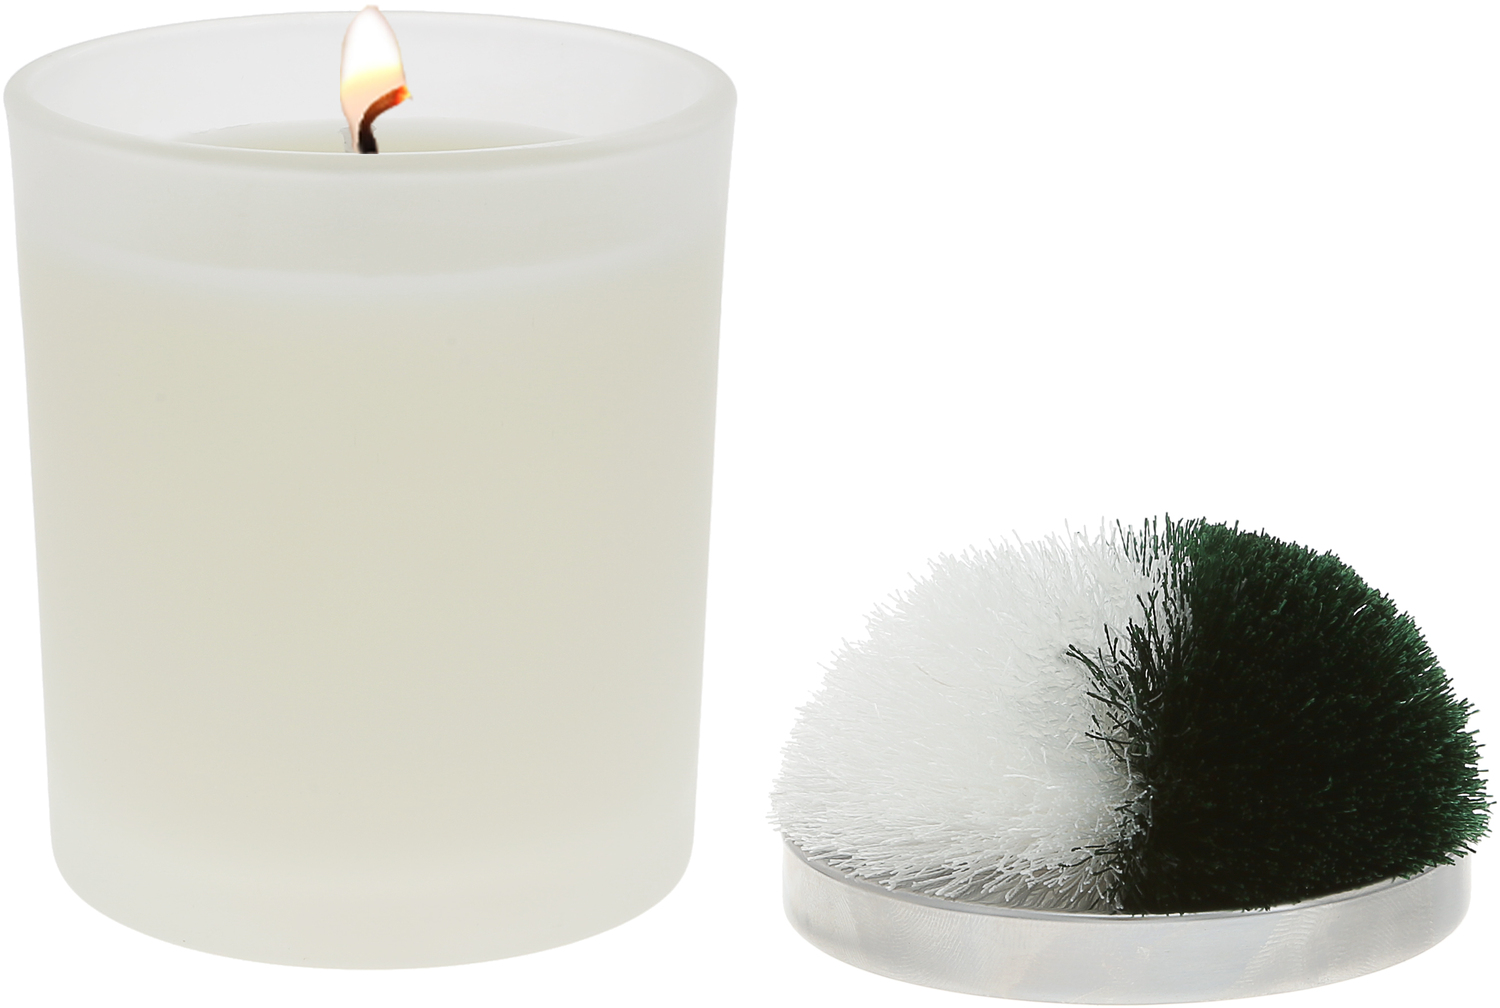 Blank - Green & White by Repre-Scent - Blank - Green & White - 5.5 oz - 100% Soy Wax Candle with Pom Pom Lid
Scent: Tranquility